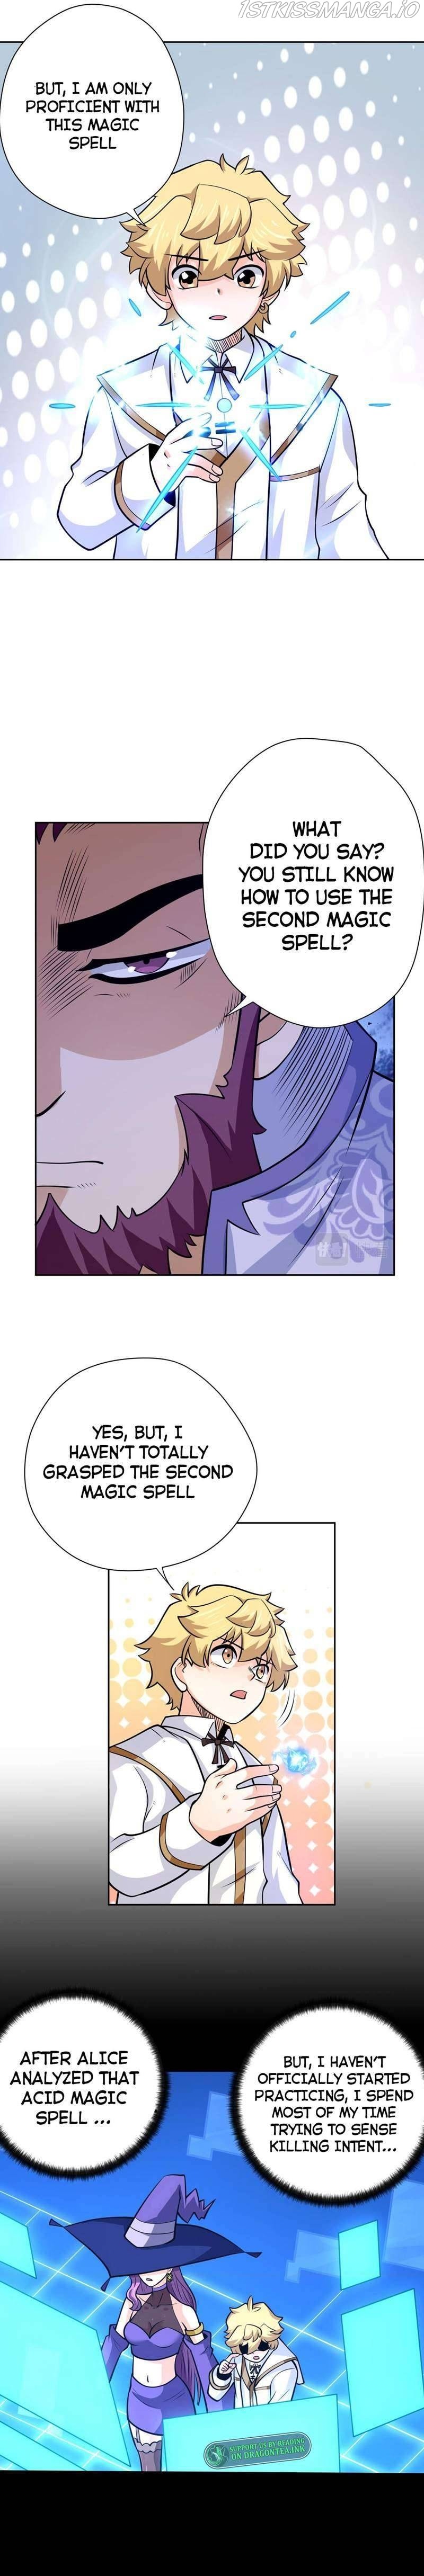 Learning Magic In Another World - Page 2